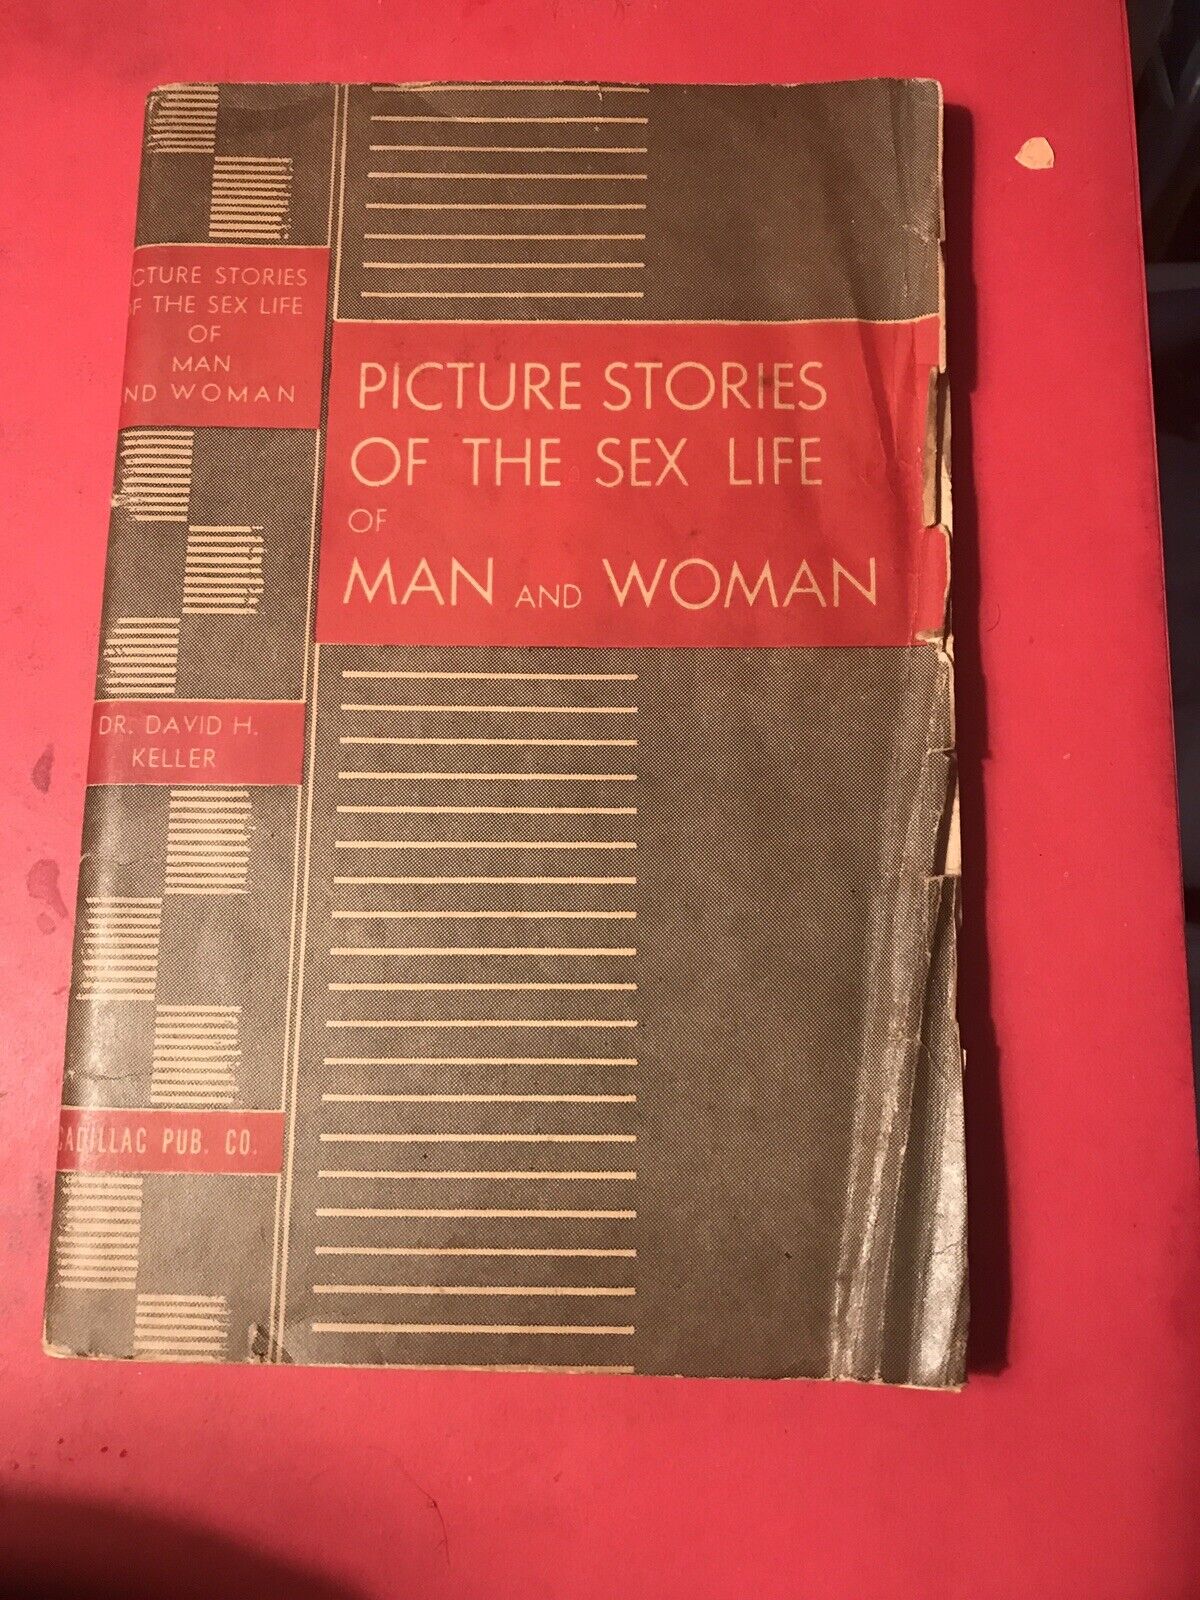 rare 1946 medical book on man and woman’s sexual Lives +